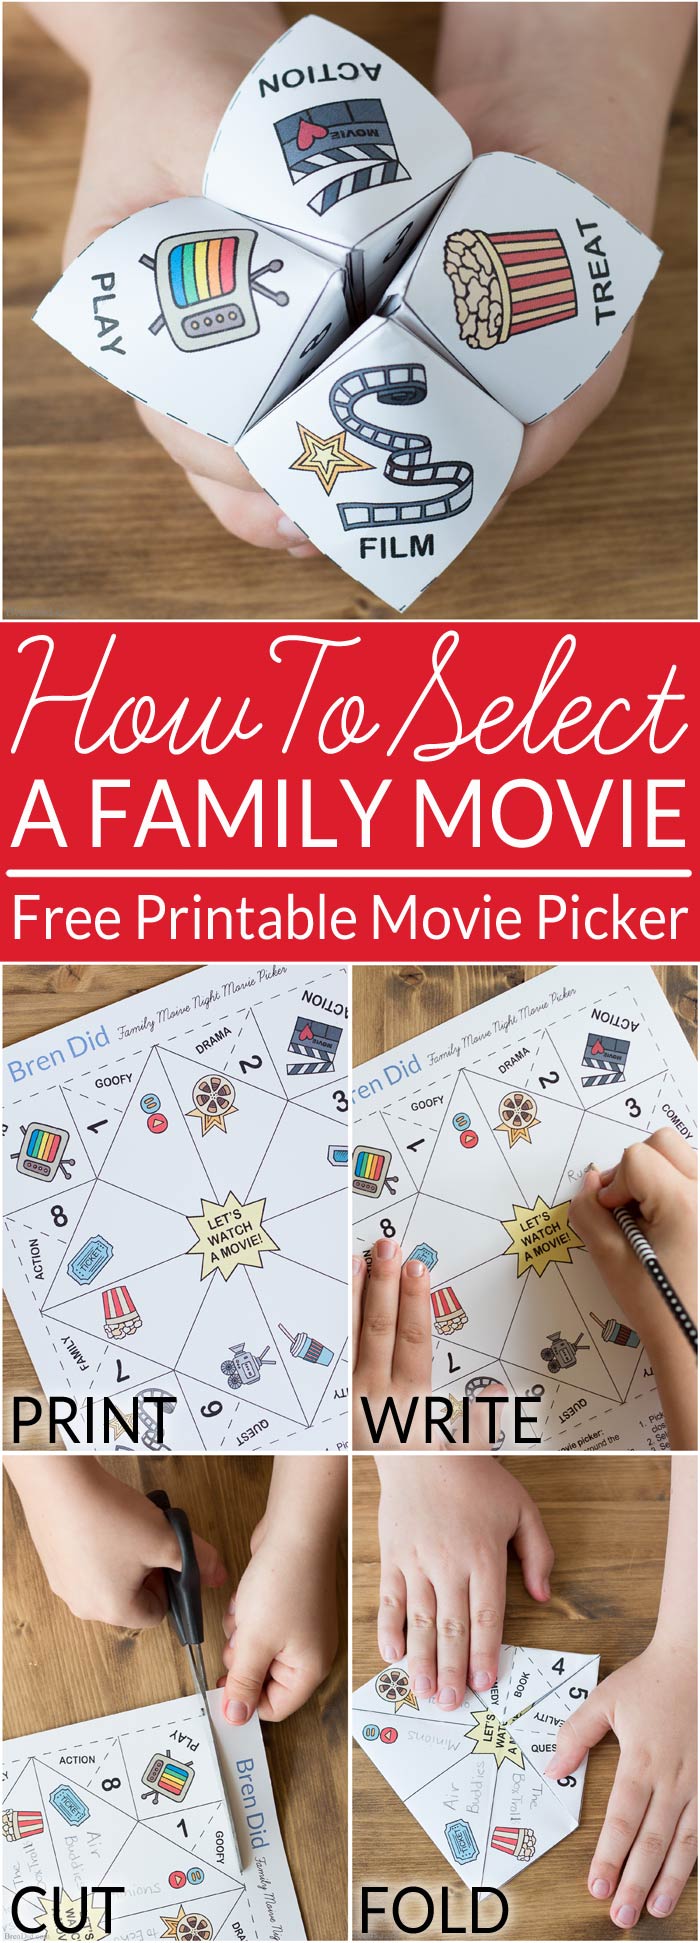 How to Select a Movie Your Family Will Love - Have you ever tried to select a movie to watch with assistance from children? This movie selector makes movie night a lot more fun. Print out the free movie selector, have each child add a few of their favorite movies, and then play a round to choose a movie for the night.